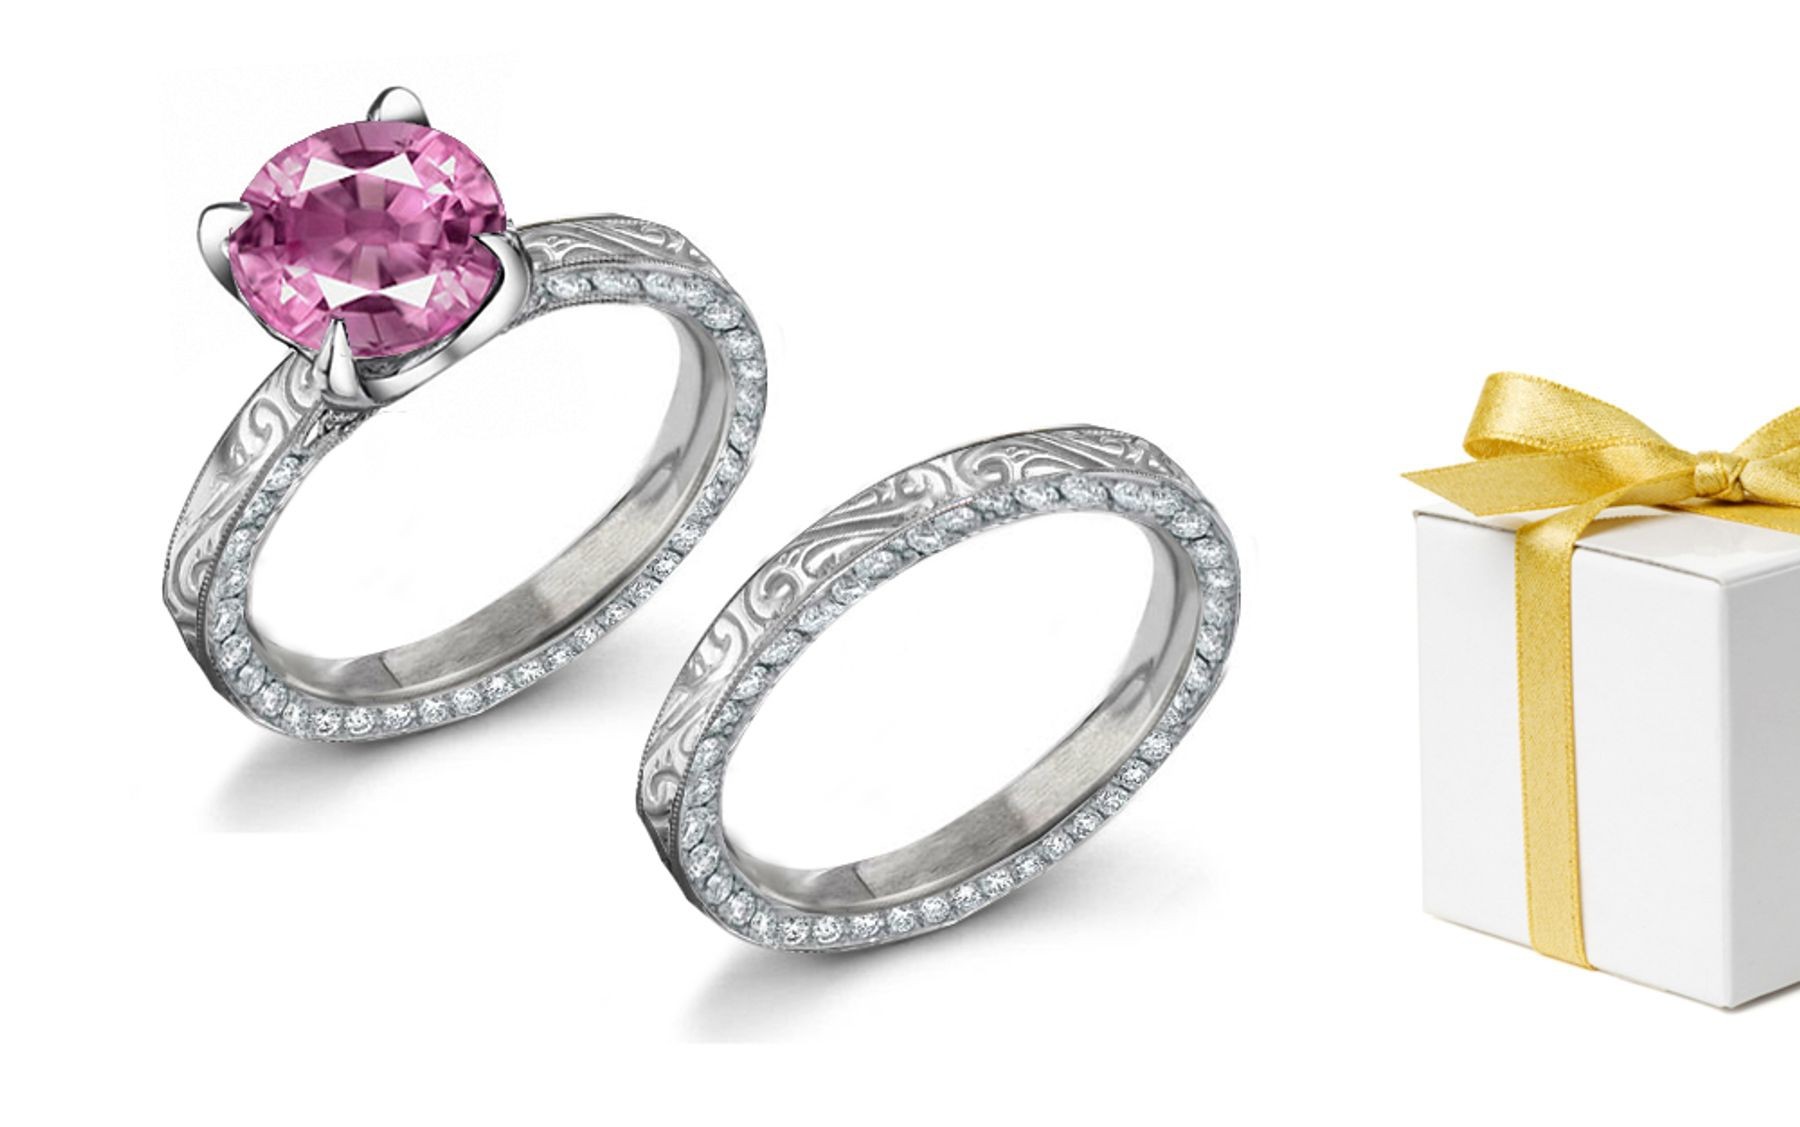 Pink Tradional Sapphire Diamond Ring with cast engraved scroll motif sides in in 14k white gold